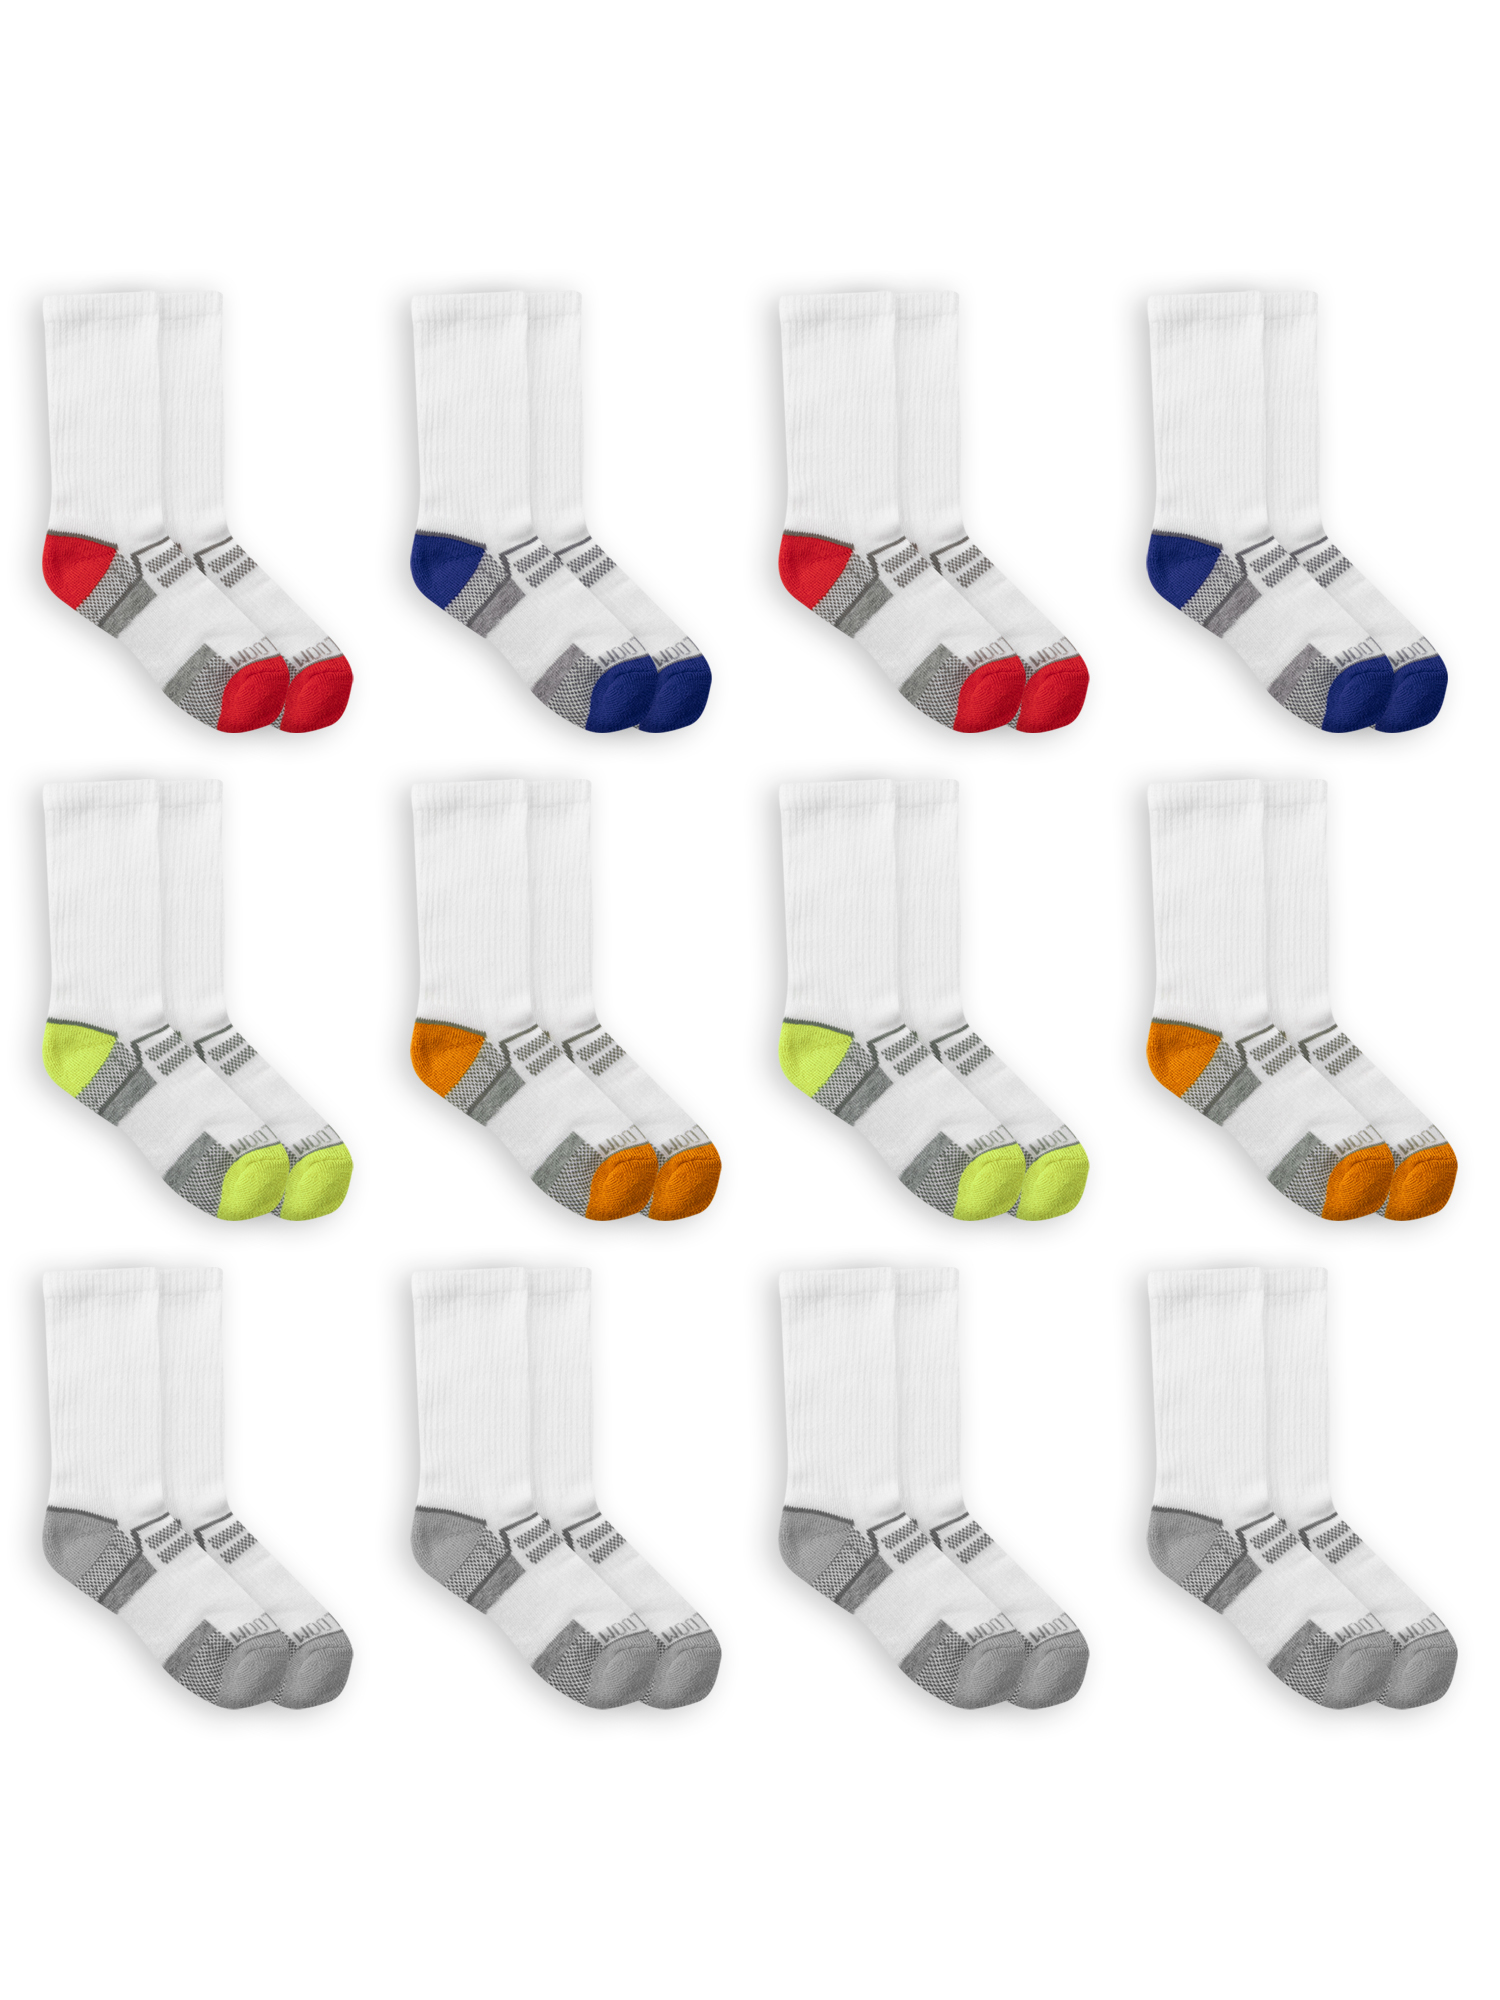 Fruit of the Loom Boys Active Crew Socks, 12 Pack, Sizes S-L - image 1 of 5